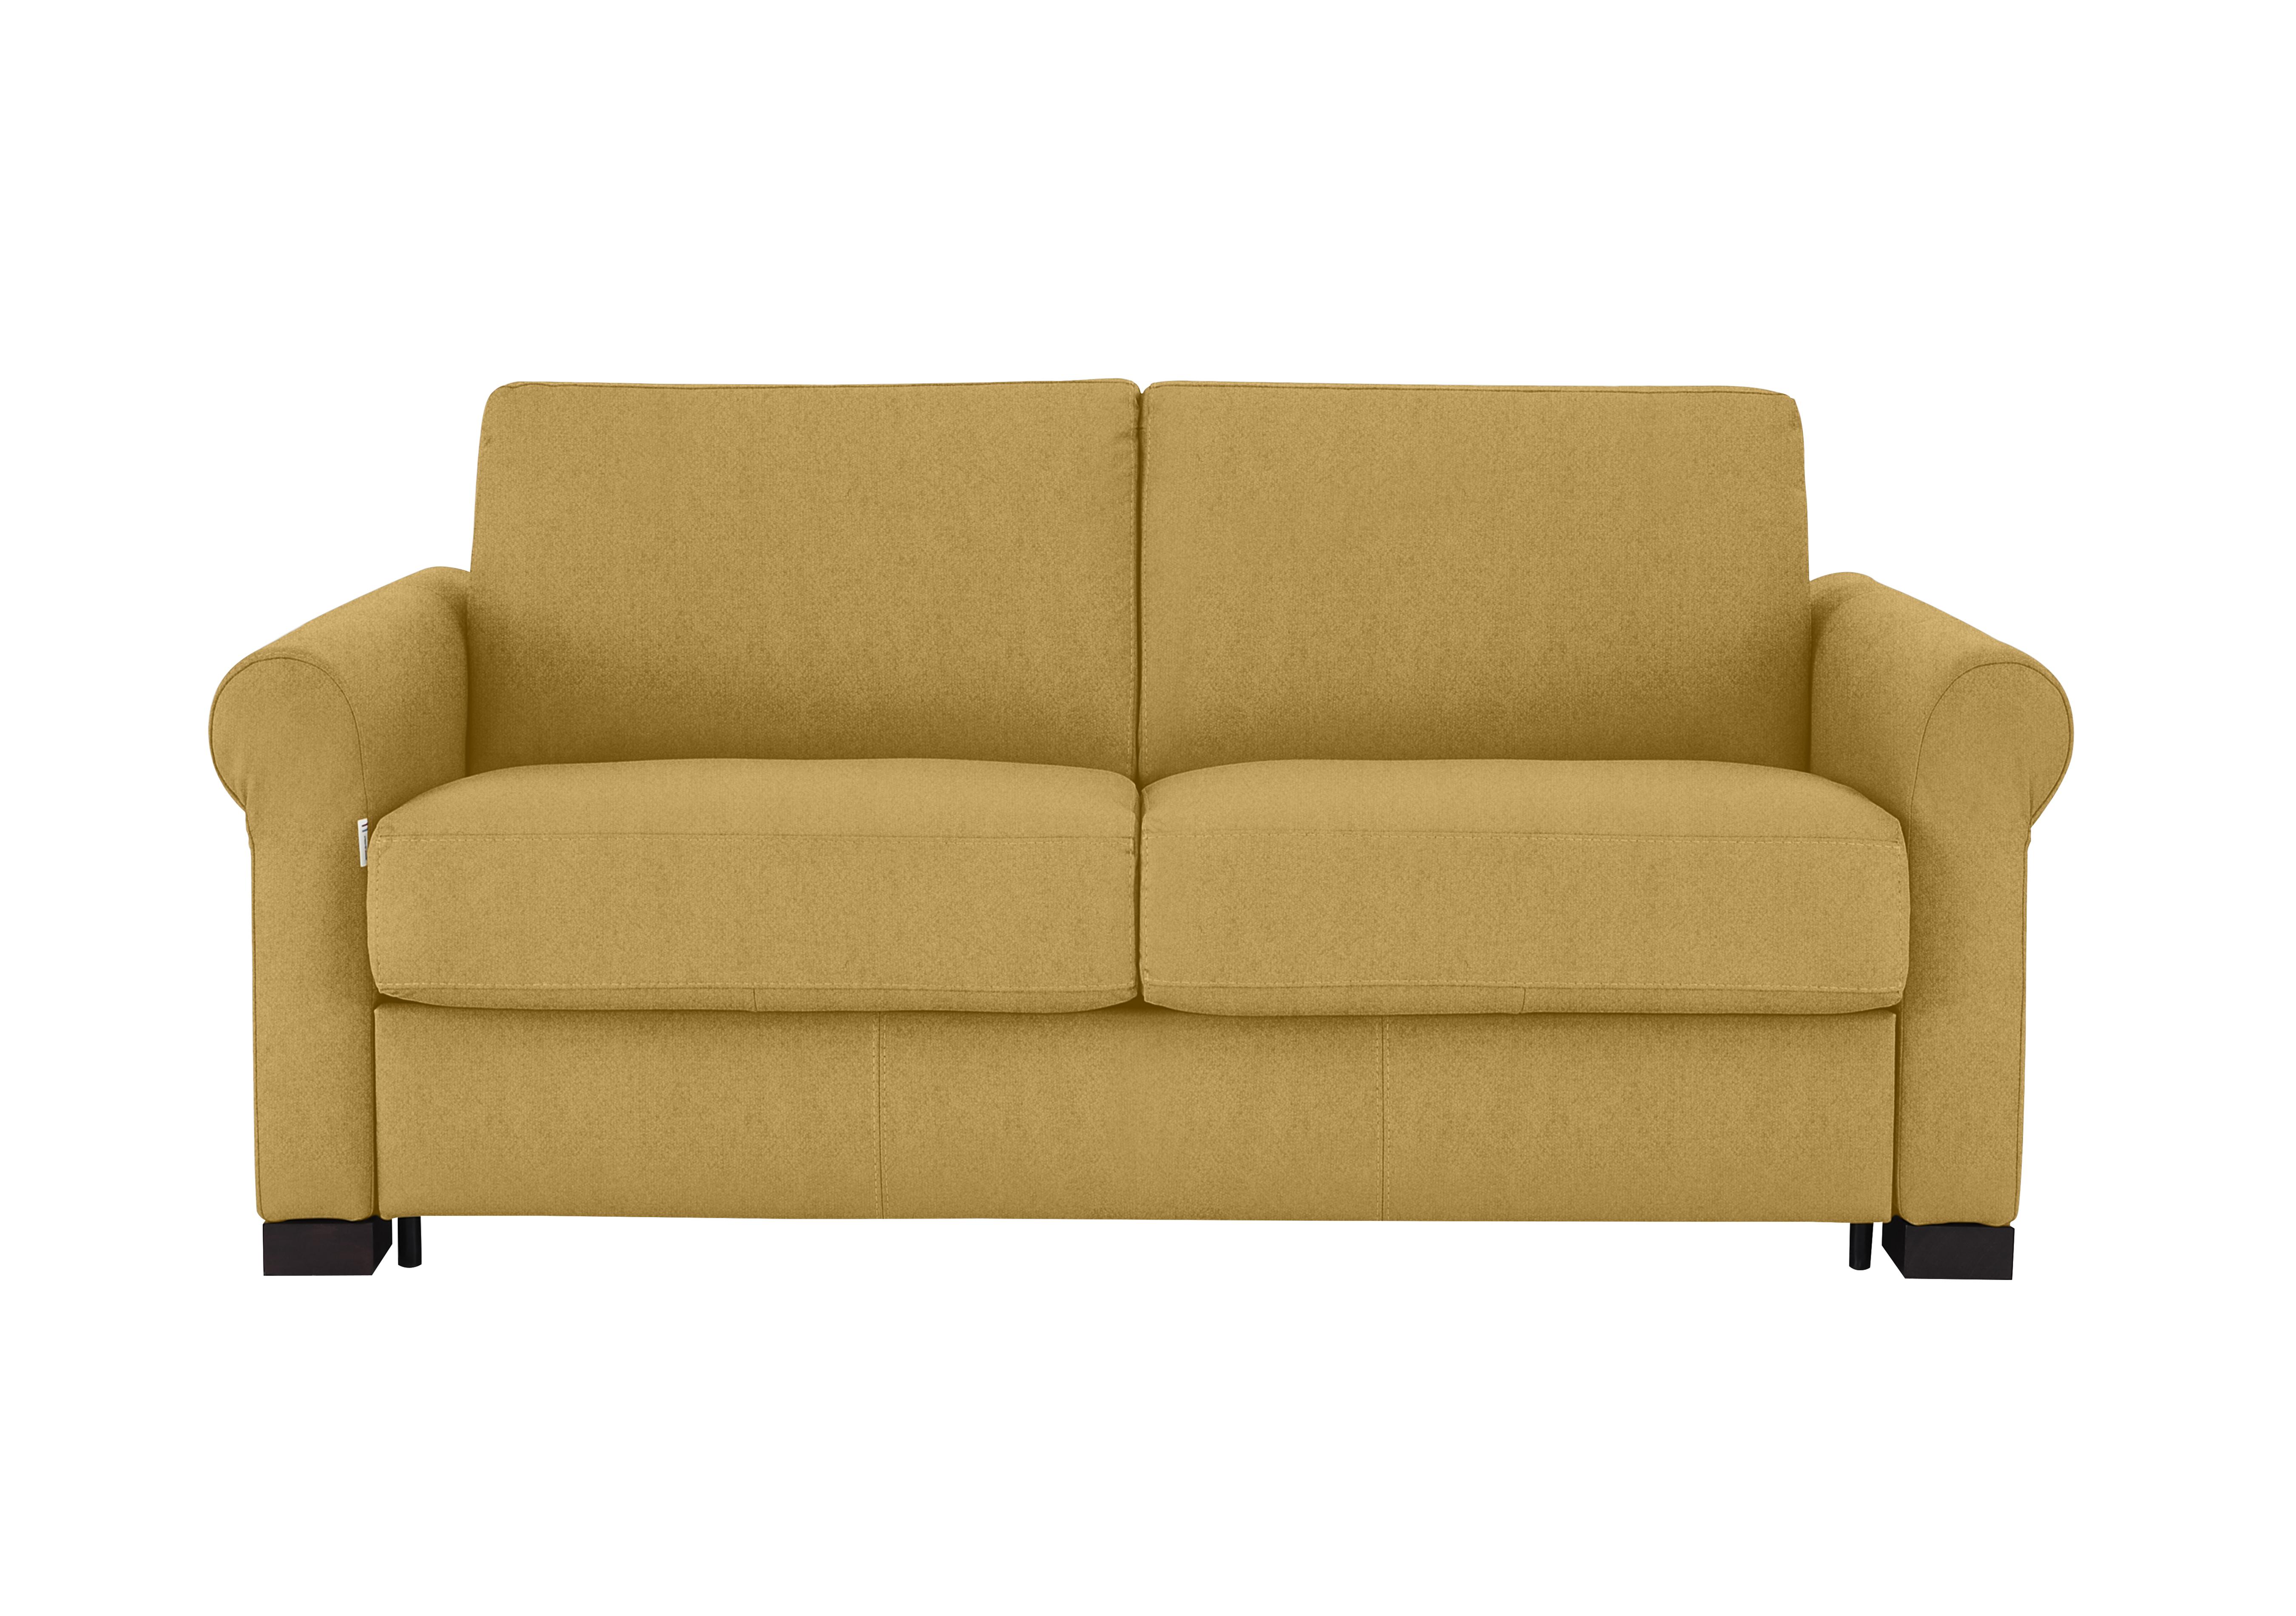 Alcova 2 Seater Fabric Sofa Bed with Scroll Arms in Fuente Mostaza on Furniture Village